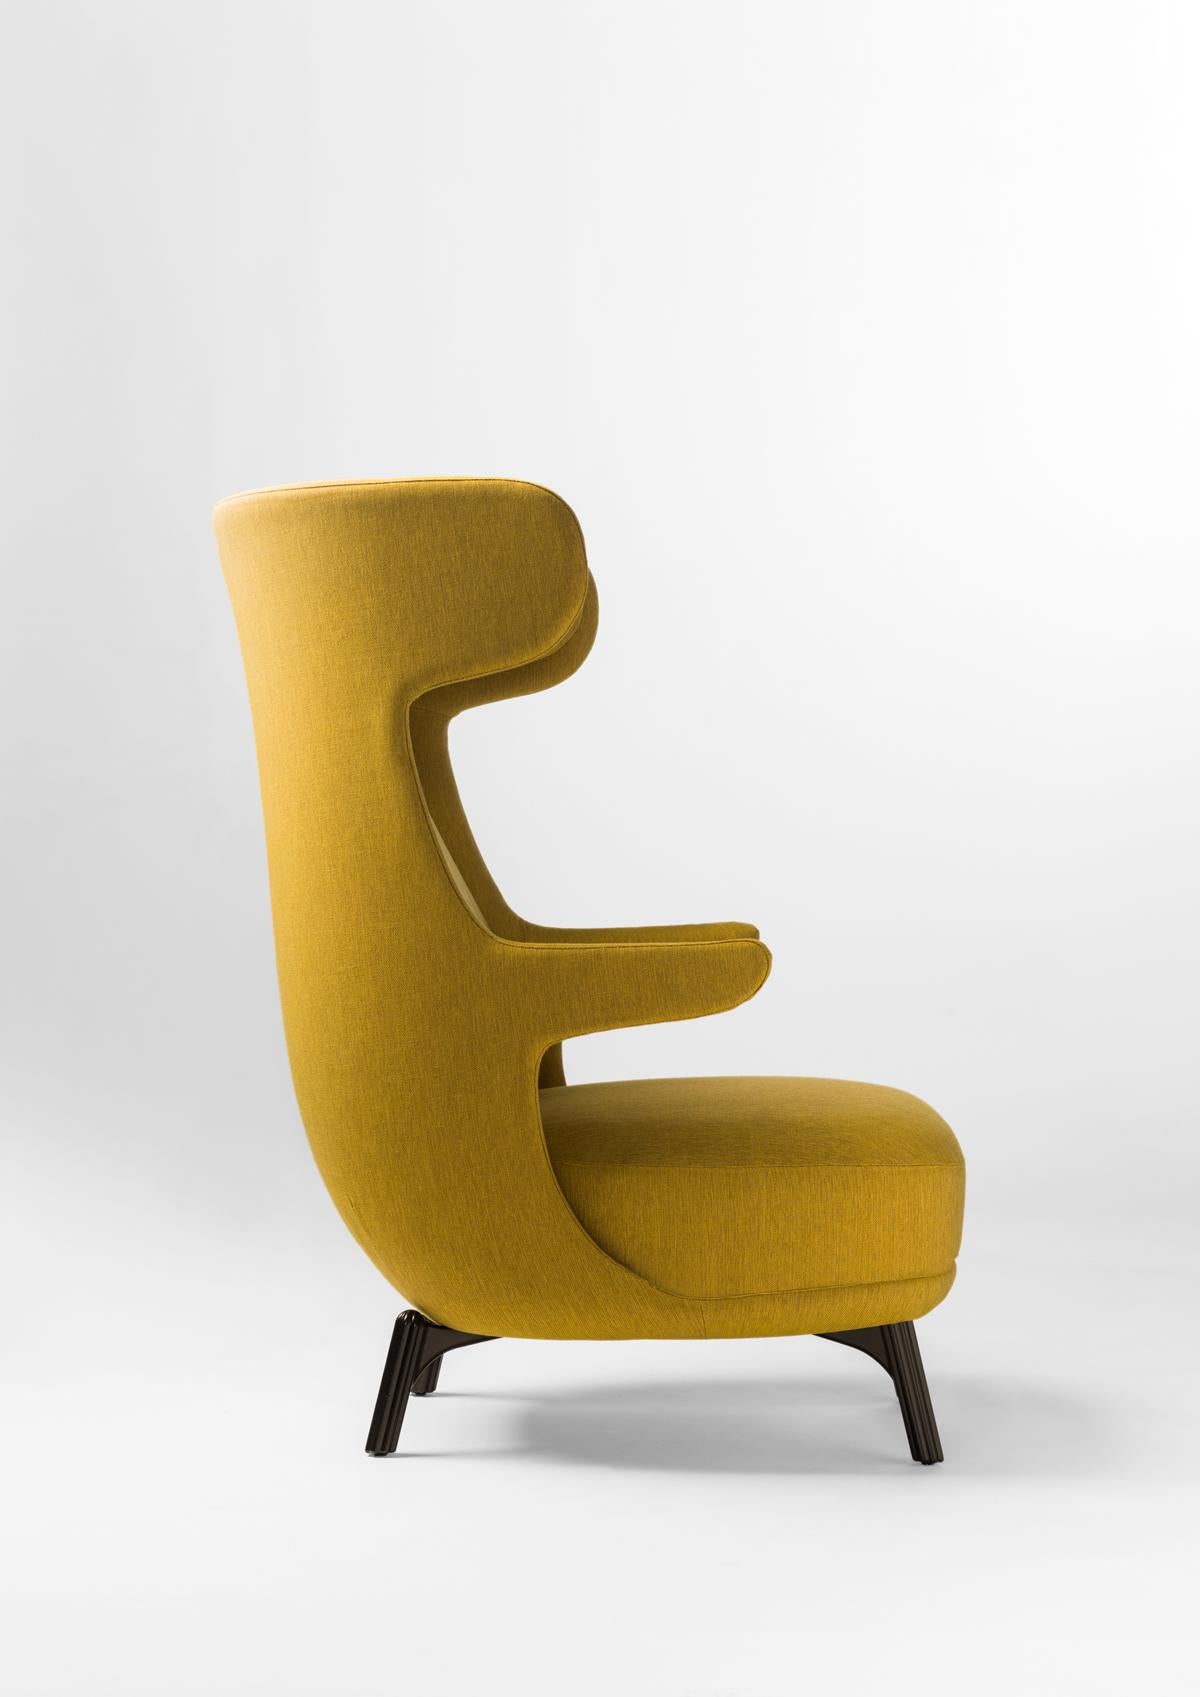 Spanish Mustard Dino armchair upholstered in fabric by Jaime Hayon